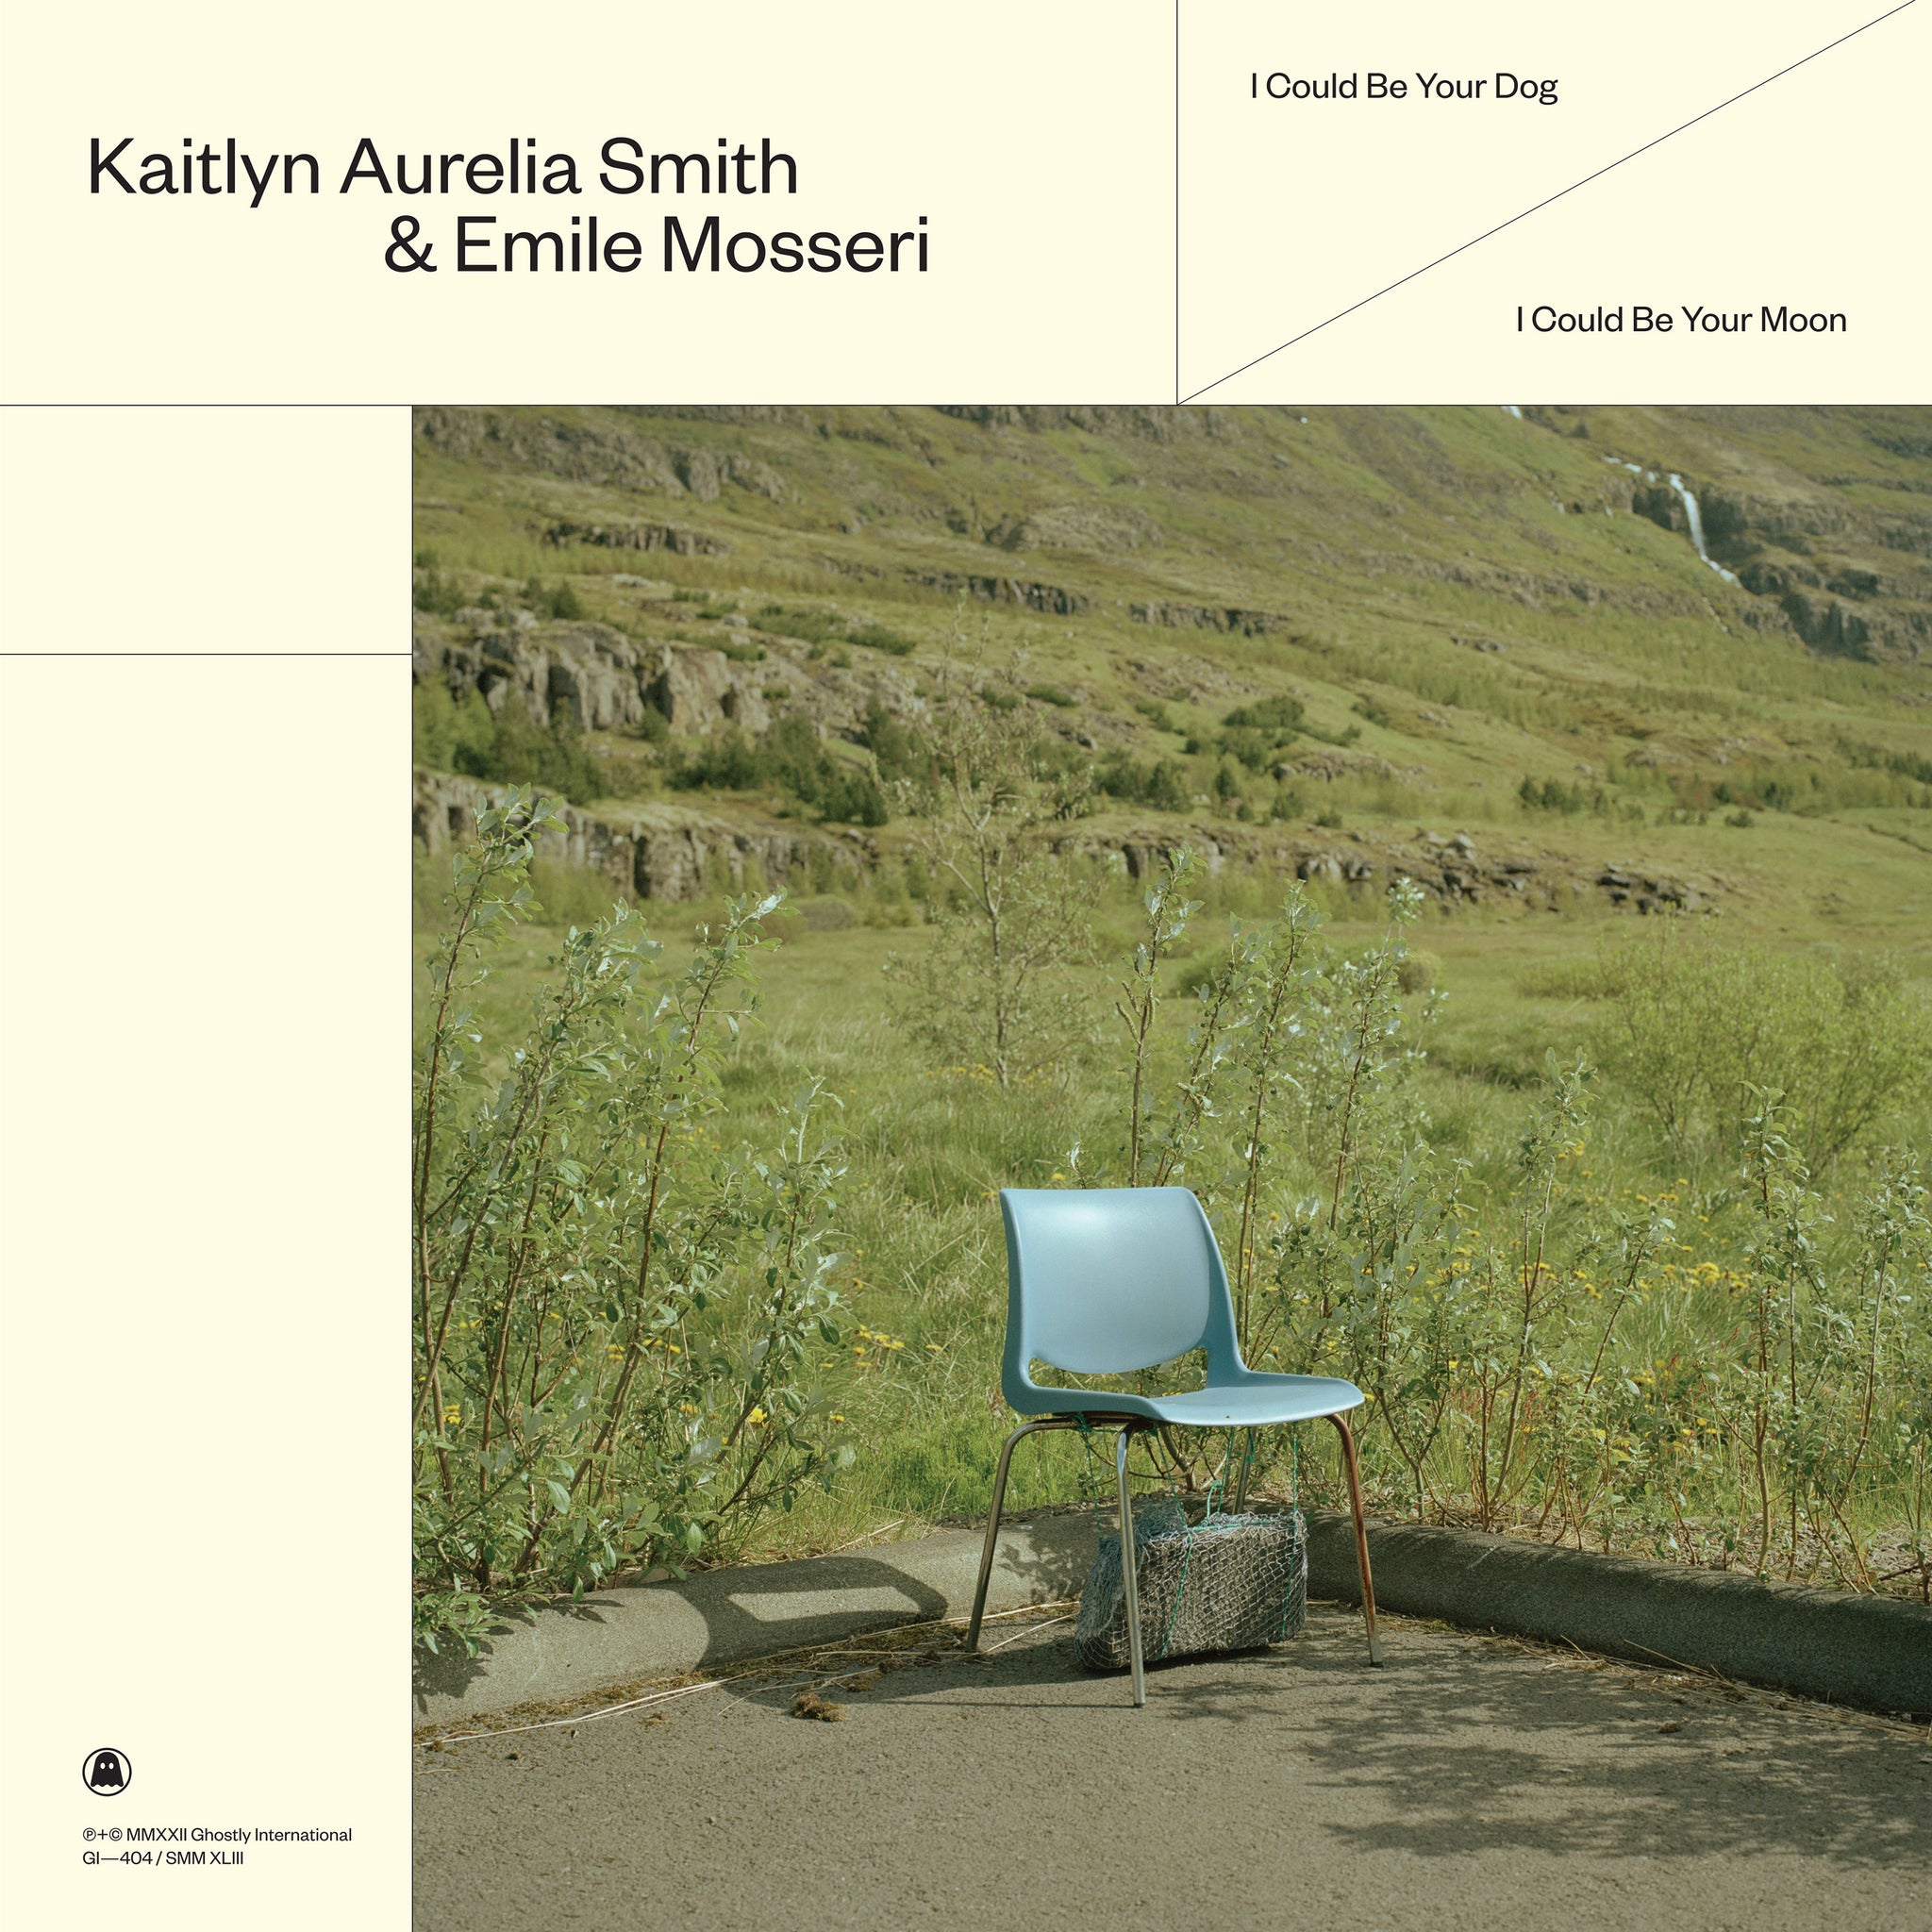 KAITLYN AURELIA SMITH & EMILE MOSSERI - I COULD BE YOUR DOG / I COULD BE YOUR MOON Vinyl LP